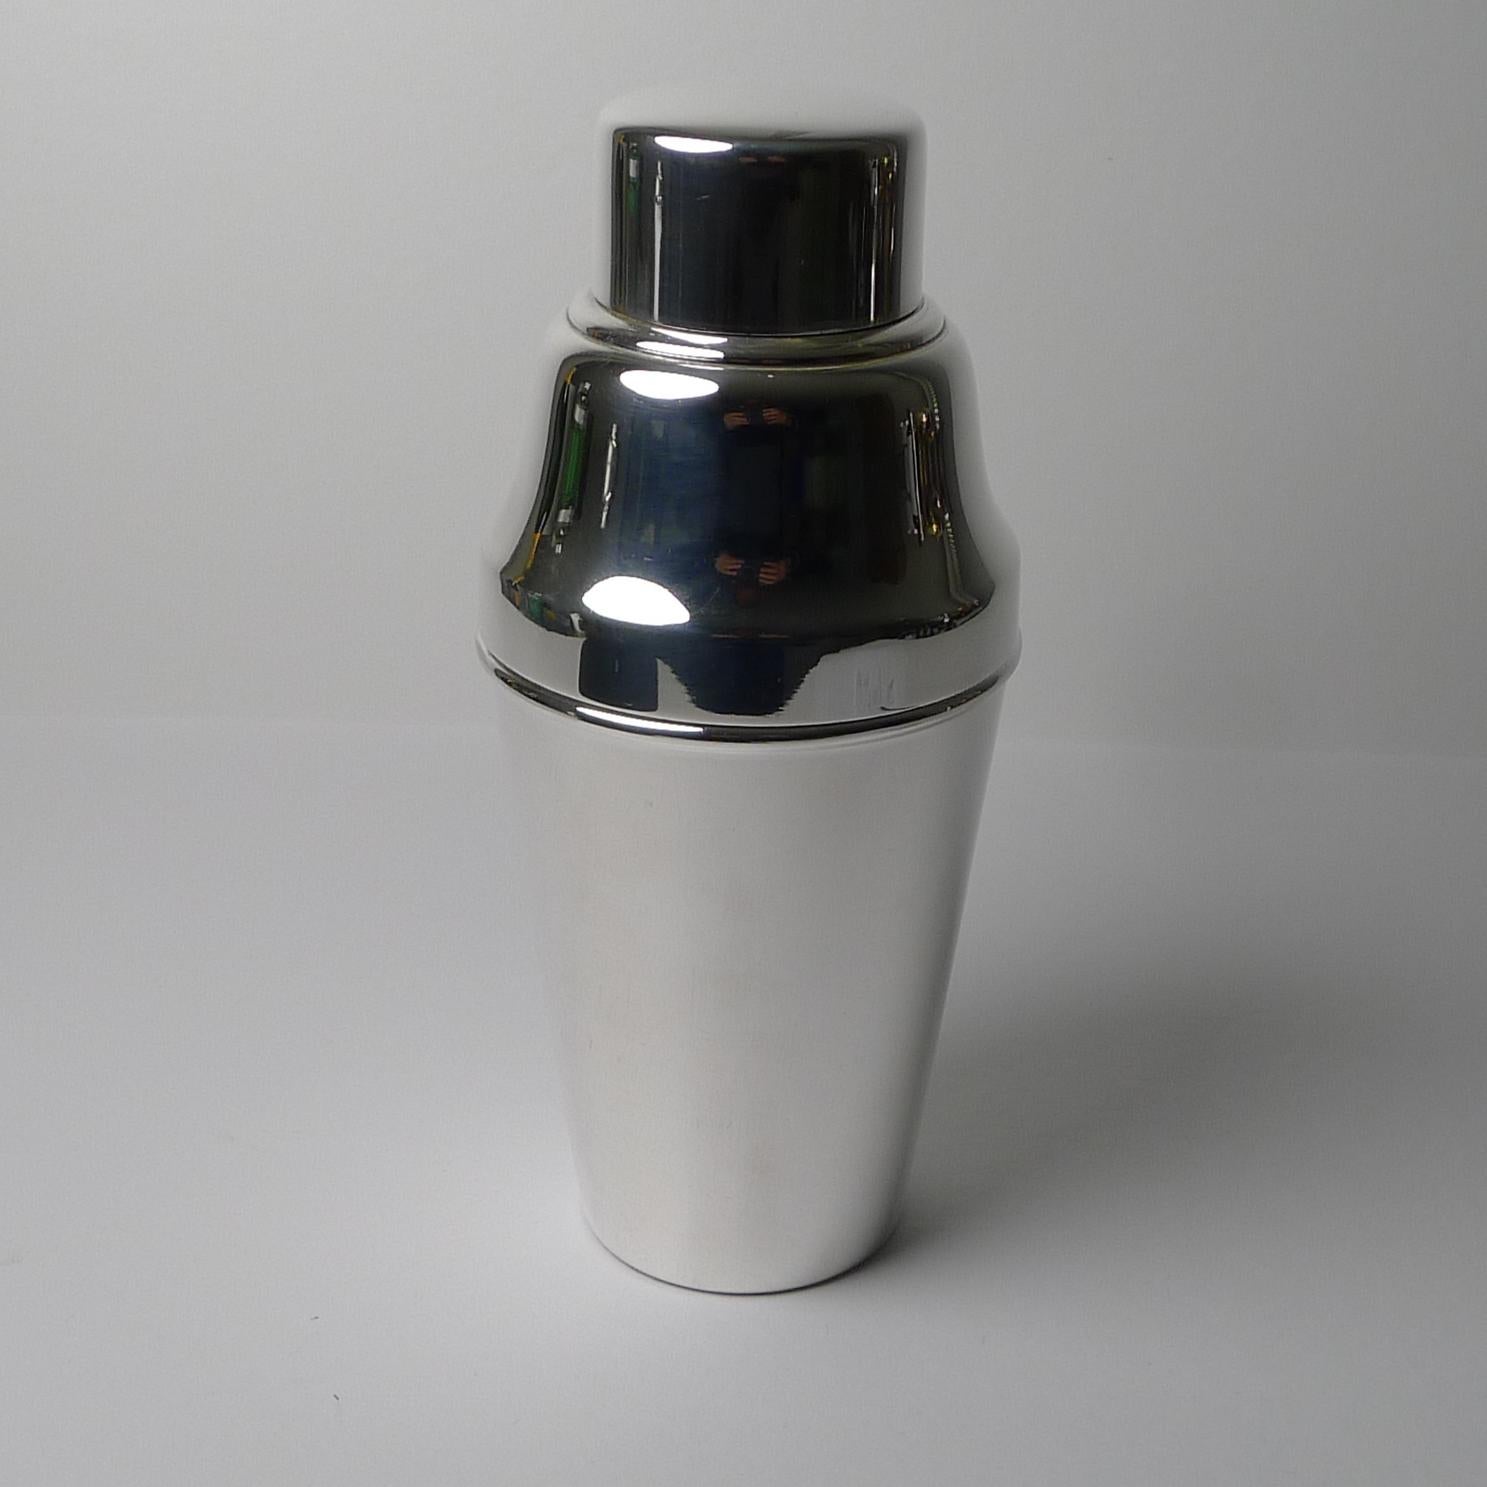 A handsome vintage Art Deco cocktail shaker in silver plate, fully marked on the underside by the maker William Suckling Ltd. It is also marked 